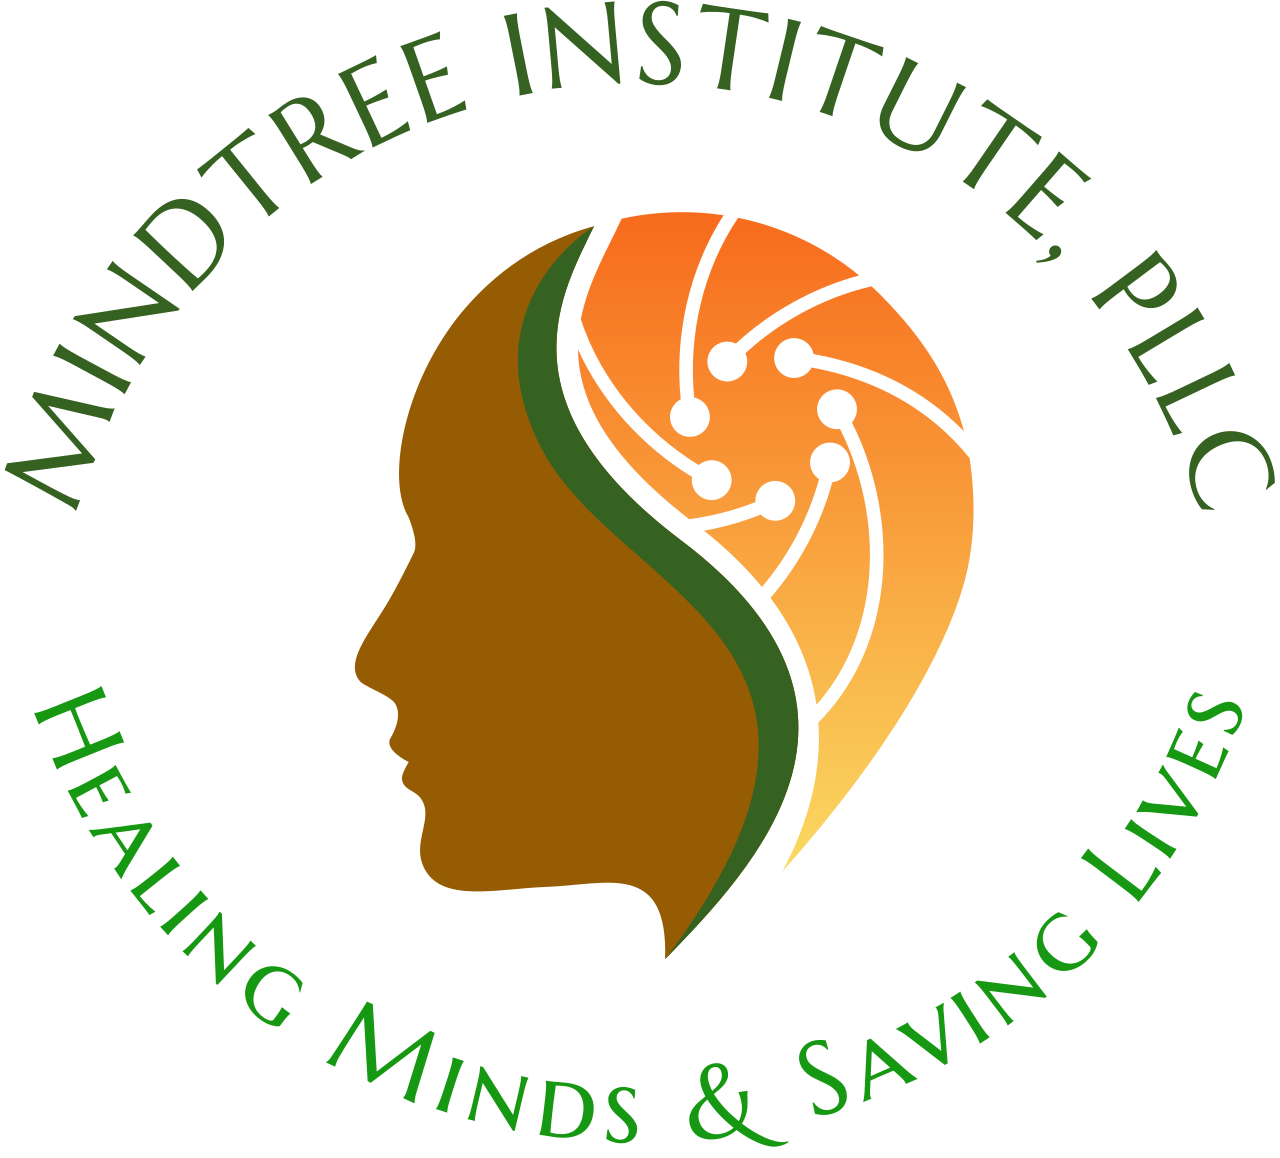 MINDTREE INSTITUTE, PLLC's web page